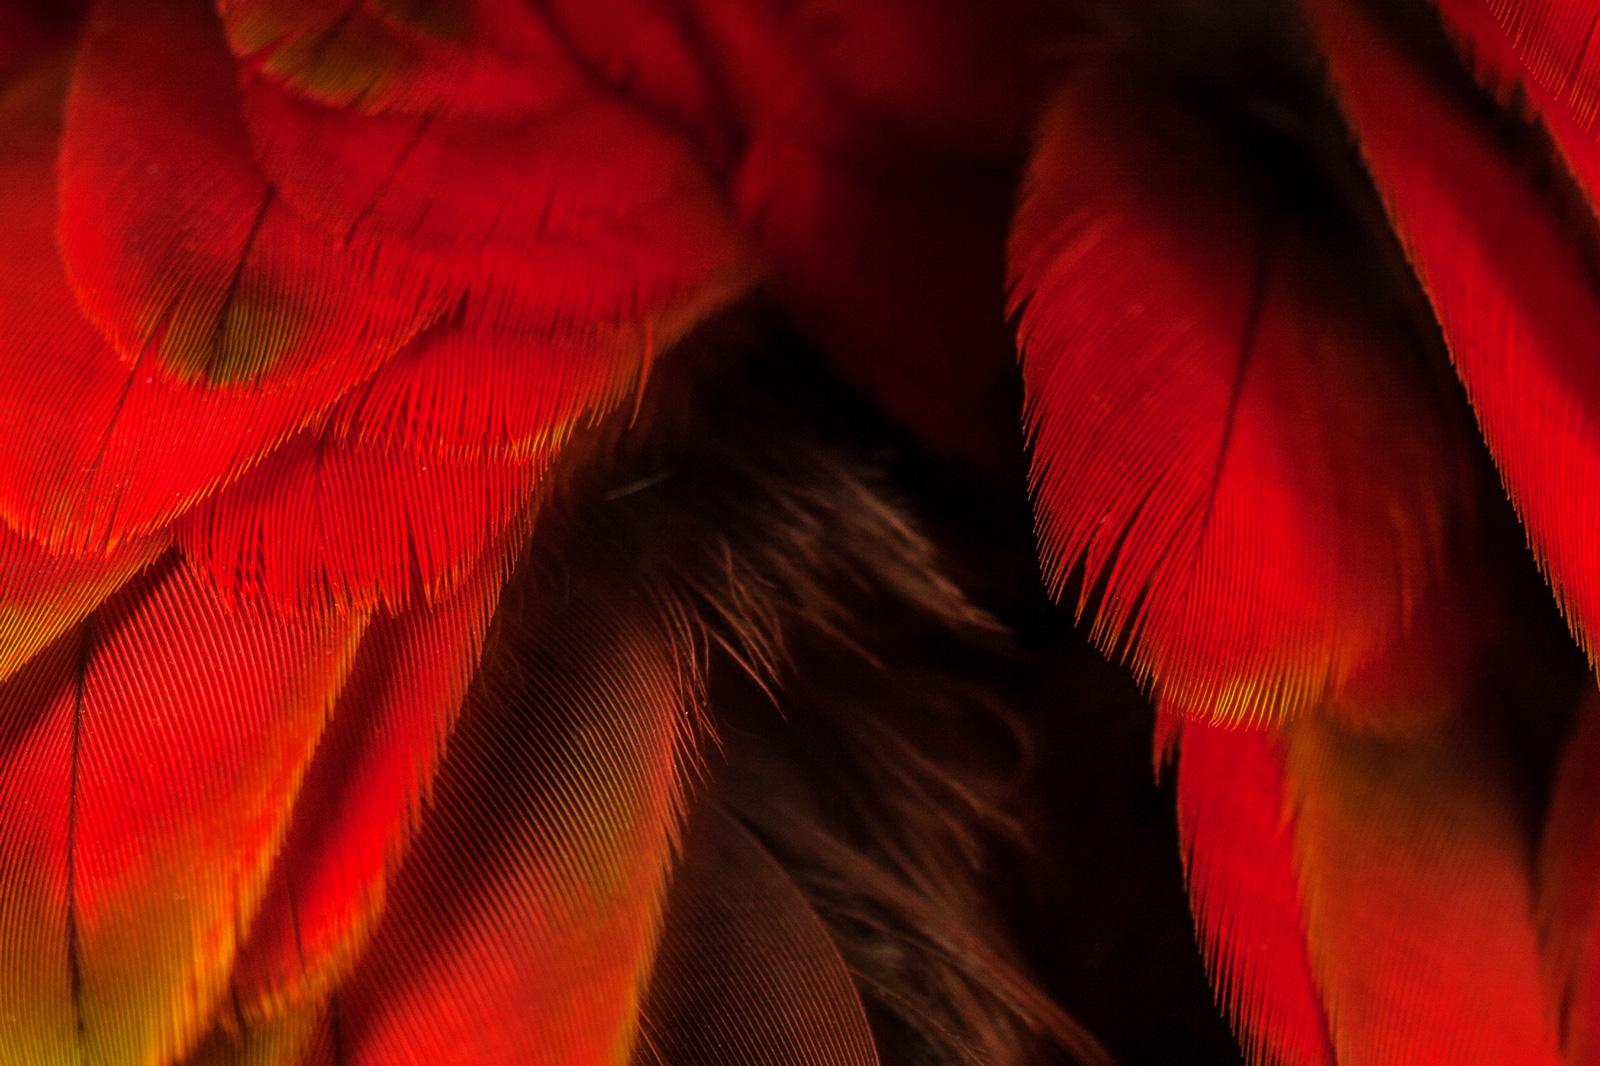 Macaw #5 -Animal signed limited edition bird contemporary fine art print, Red - Photograph by Tim Platt